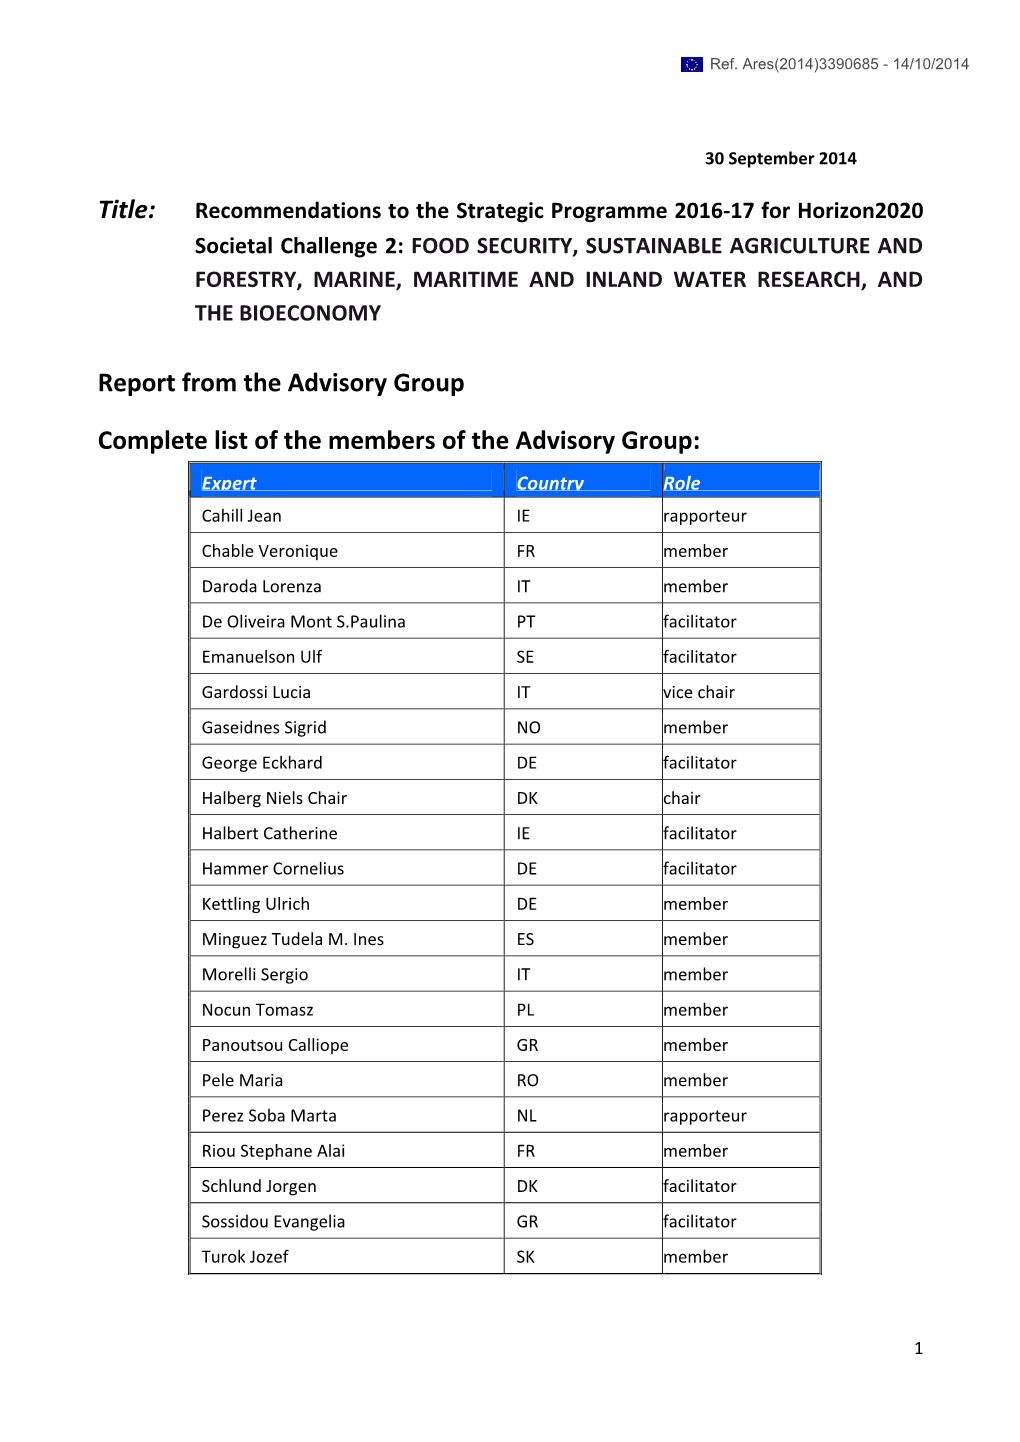 Report from the Advisory Group Complete List of the Members of the Advisory Group